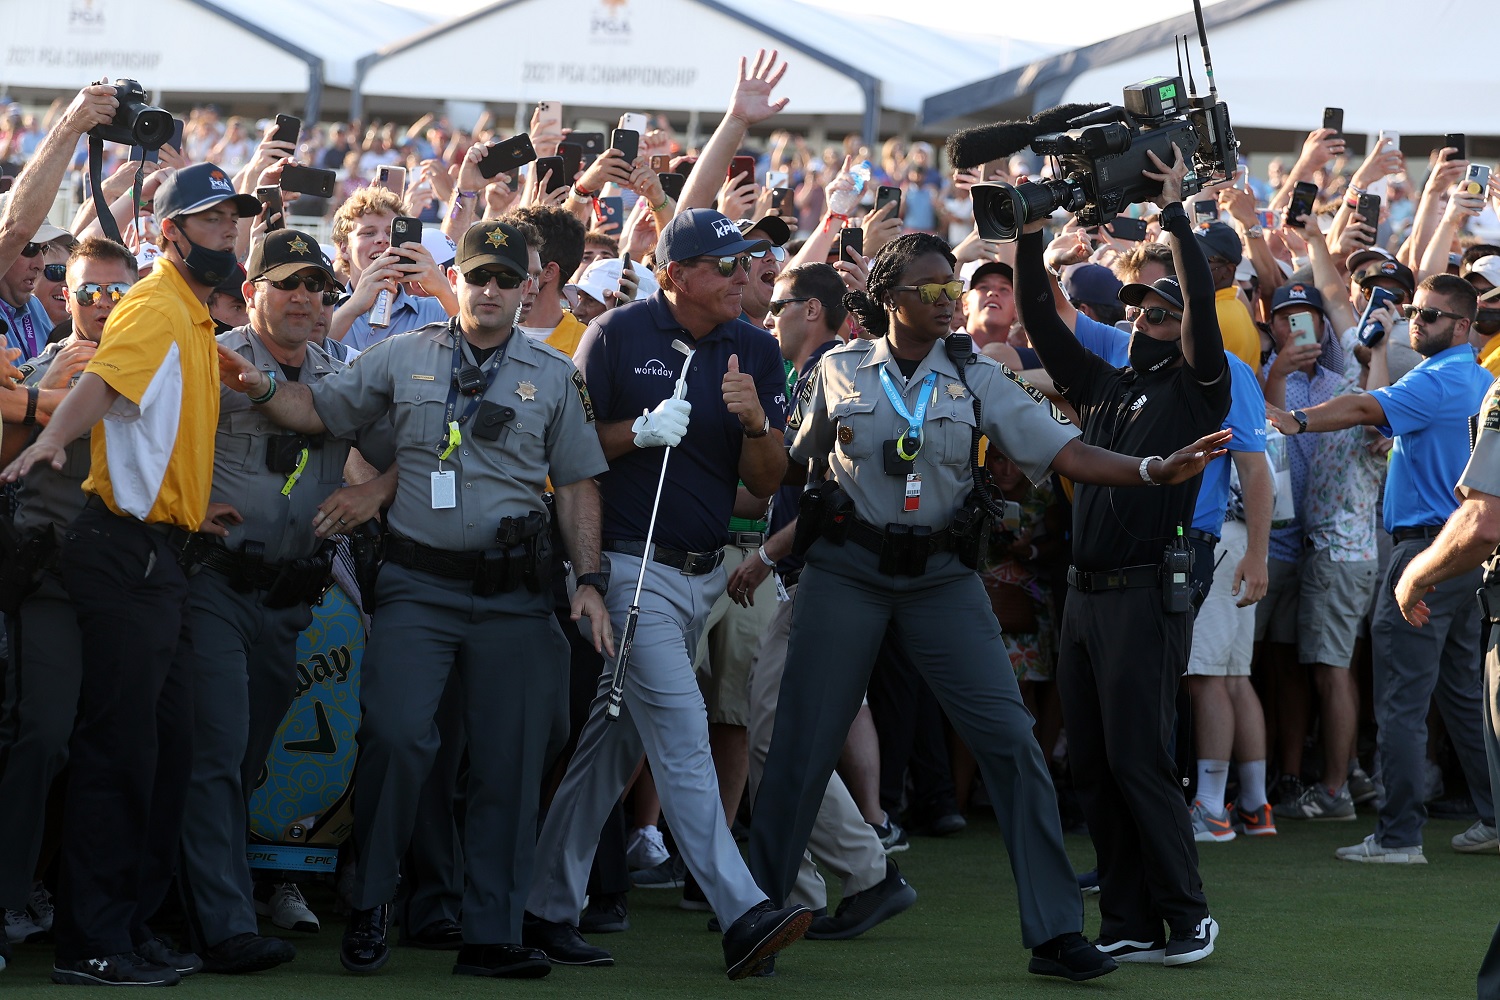 While Brooks Koepka was caught up in the trailing crowd, Phil Mickelson was assisted by security on the 18th fairway during the PGA Championship at Kiawah Island.